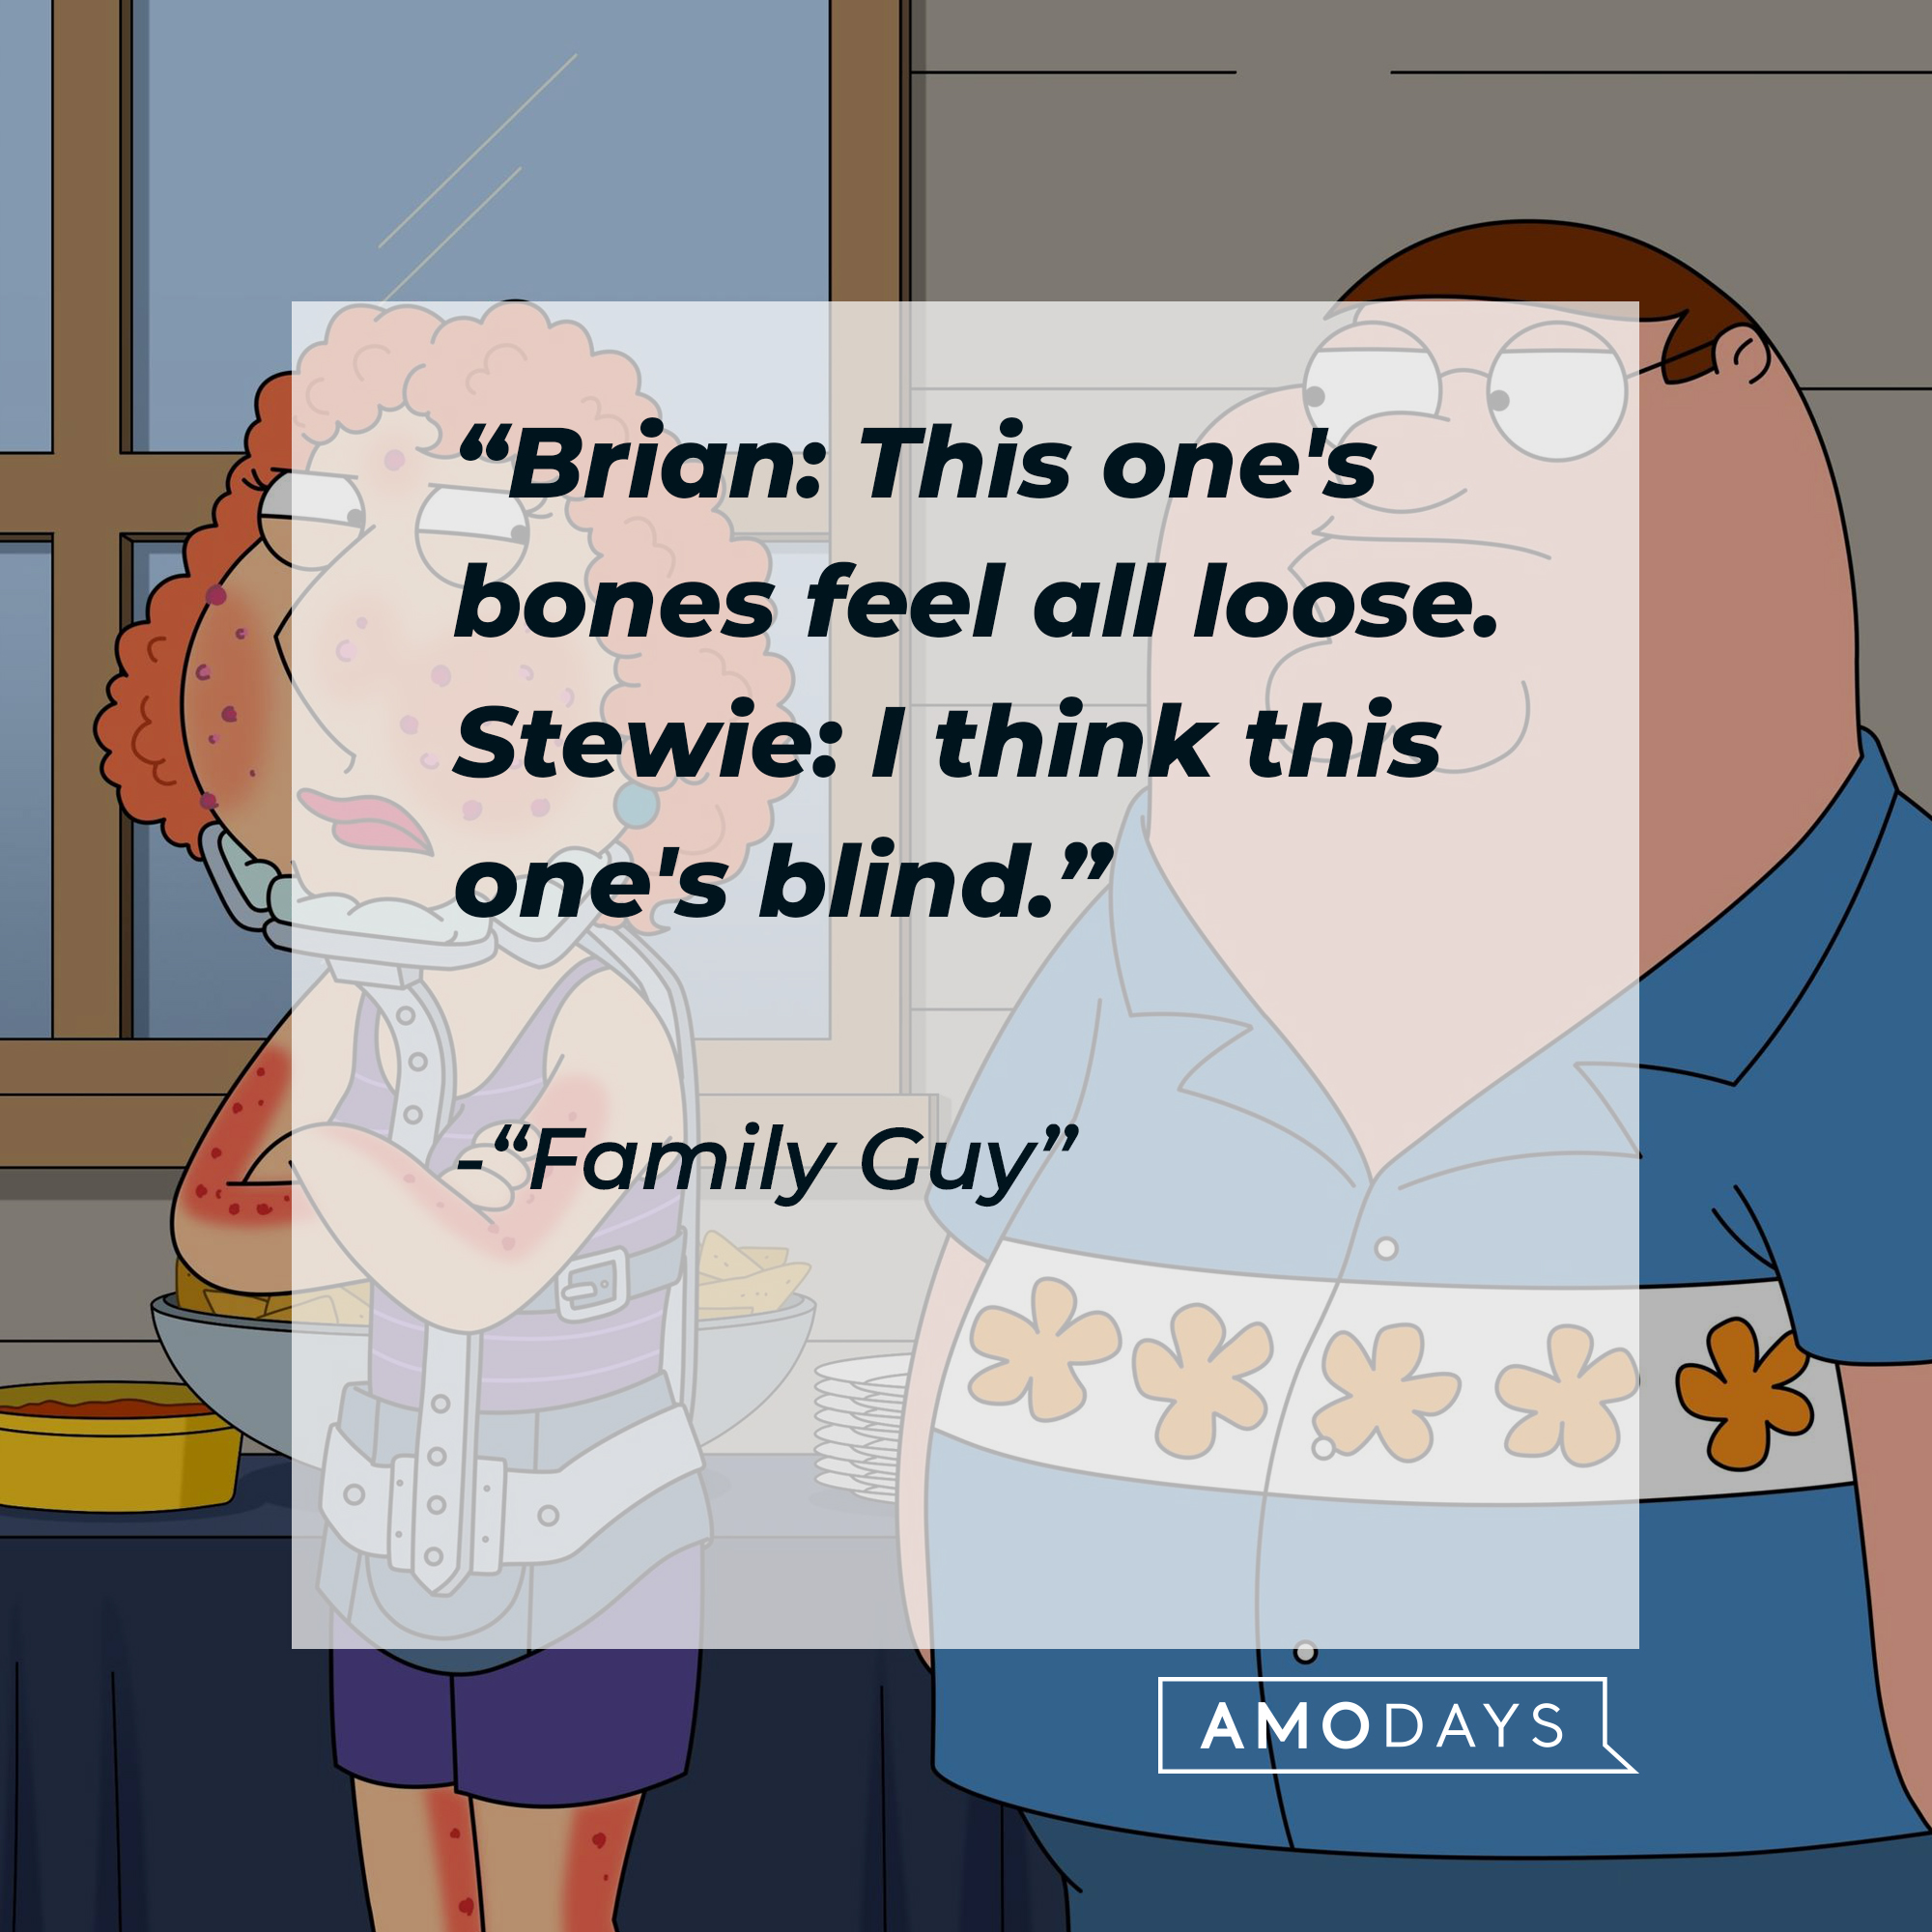 Peter and Lois Griffin with the dialogue: "Brian: This one's bones feel all loose. ; Stewie: I think this one's blind." | Source: Facebook.com/FamilyGuy